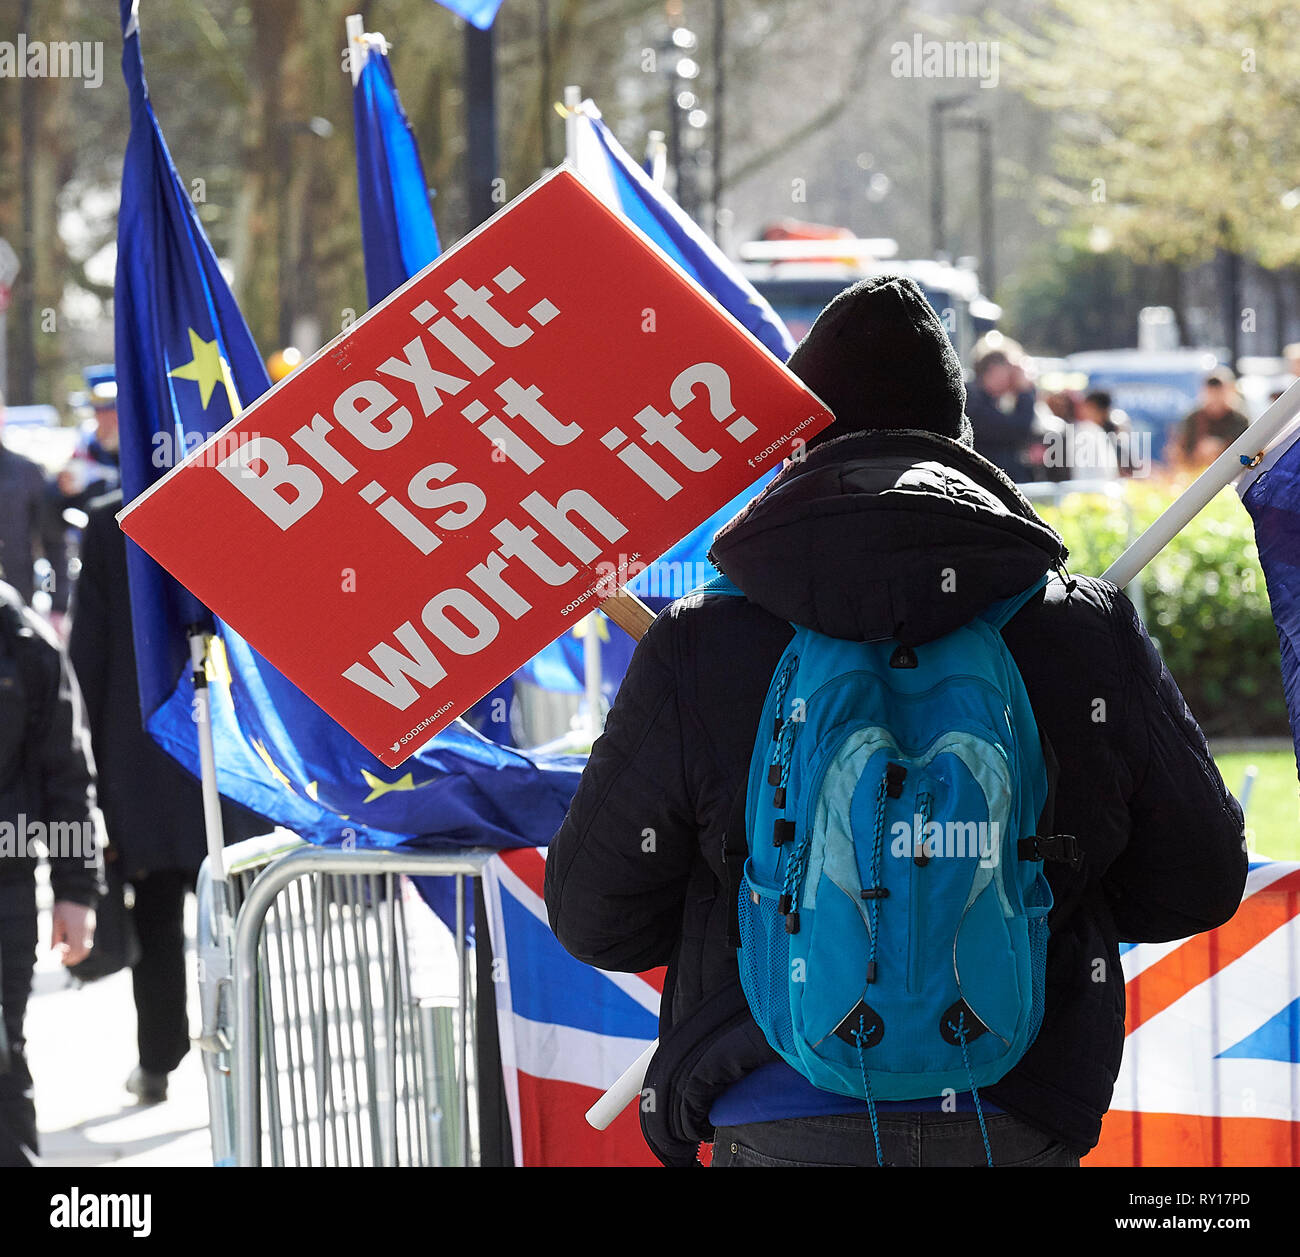 London, UK. 11th March 2019. Pro remain campaigners enjoy the sun outside Parliament. Credit: Thomas Bowles/Alamy Live News Stock Photo